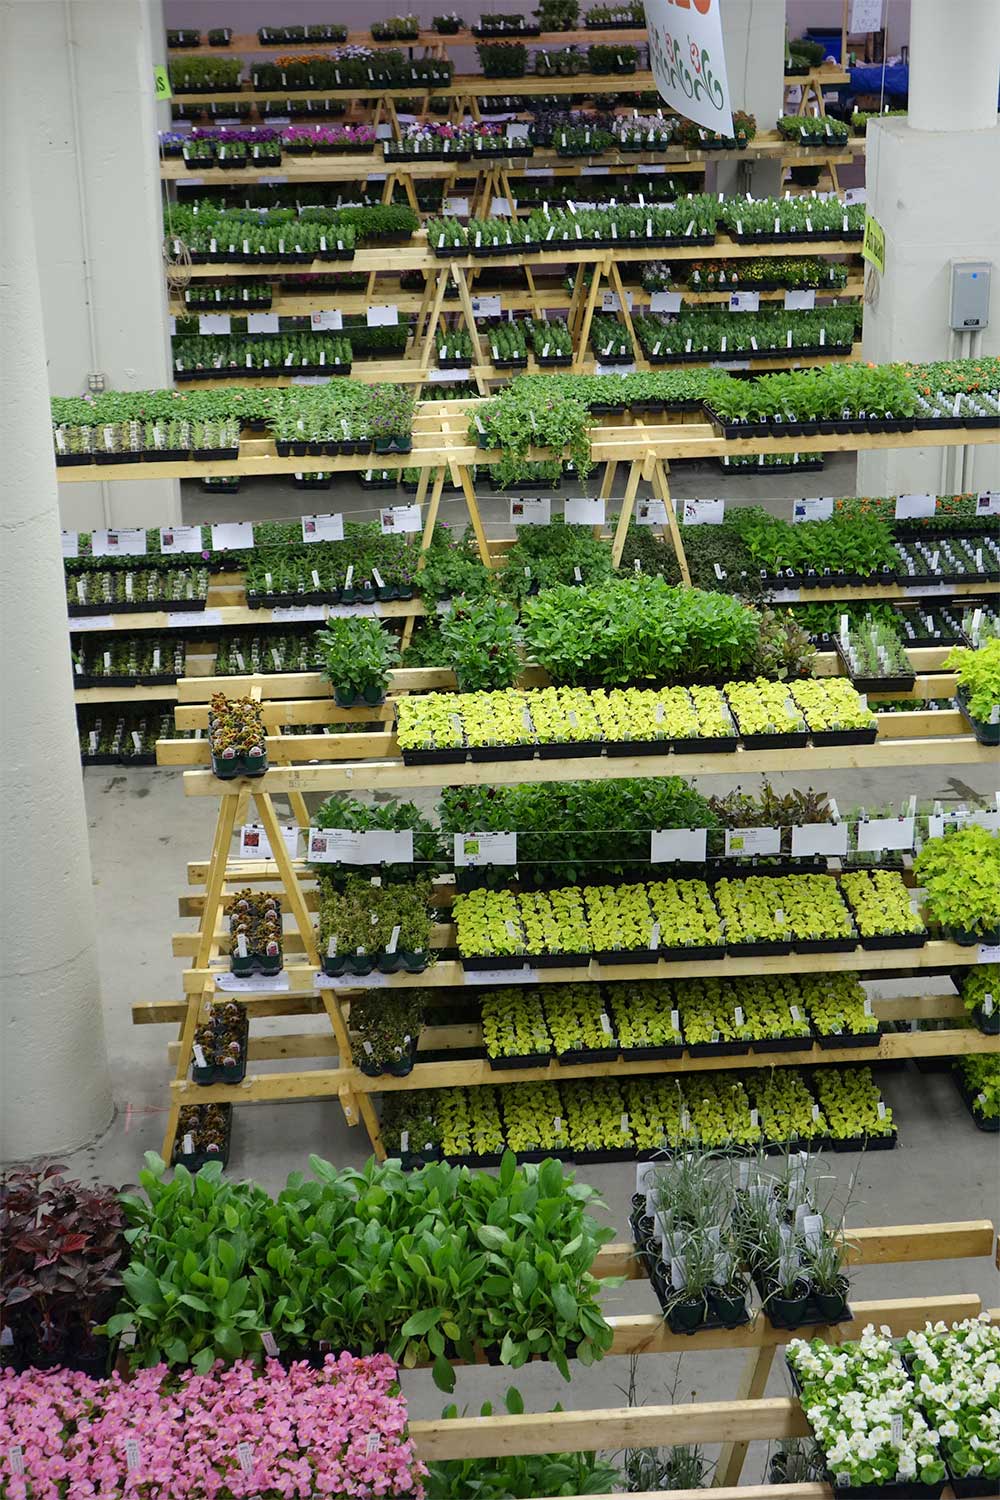 Many rows of tables with several shelves, full of plants at the Friends School Plant Sale